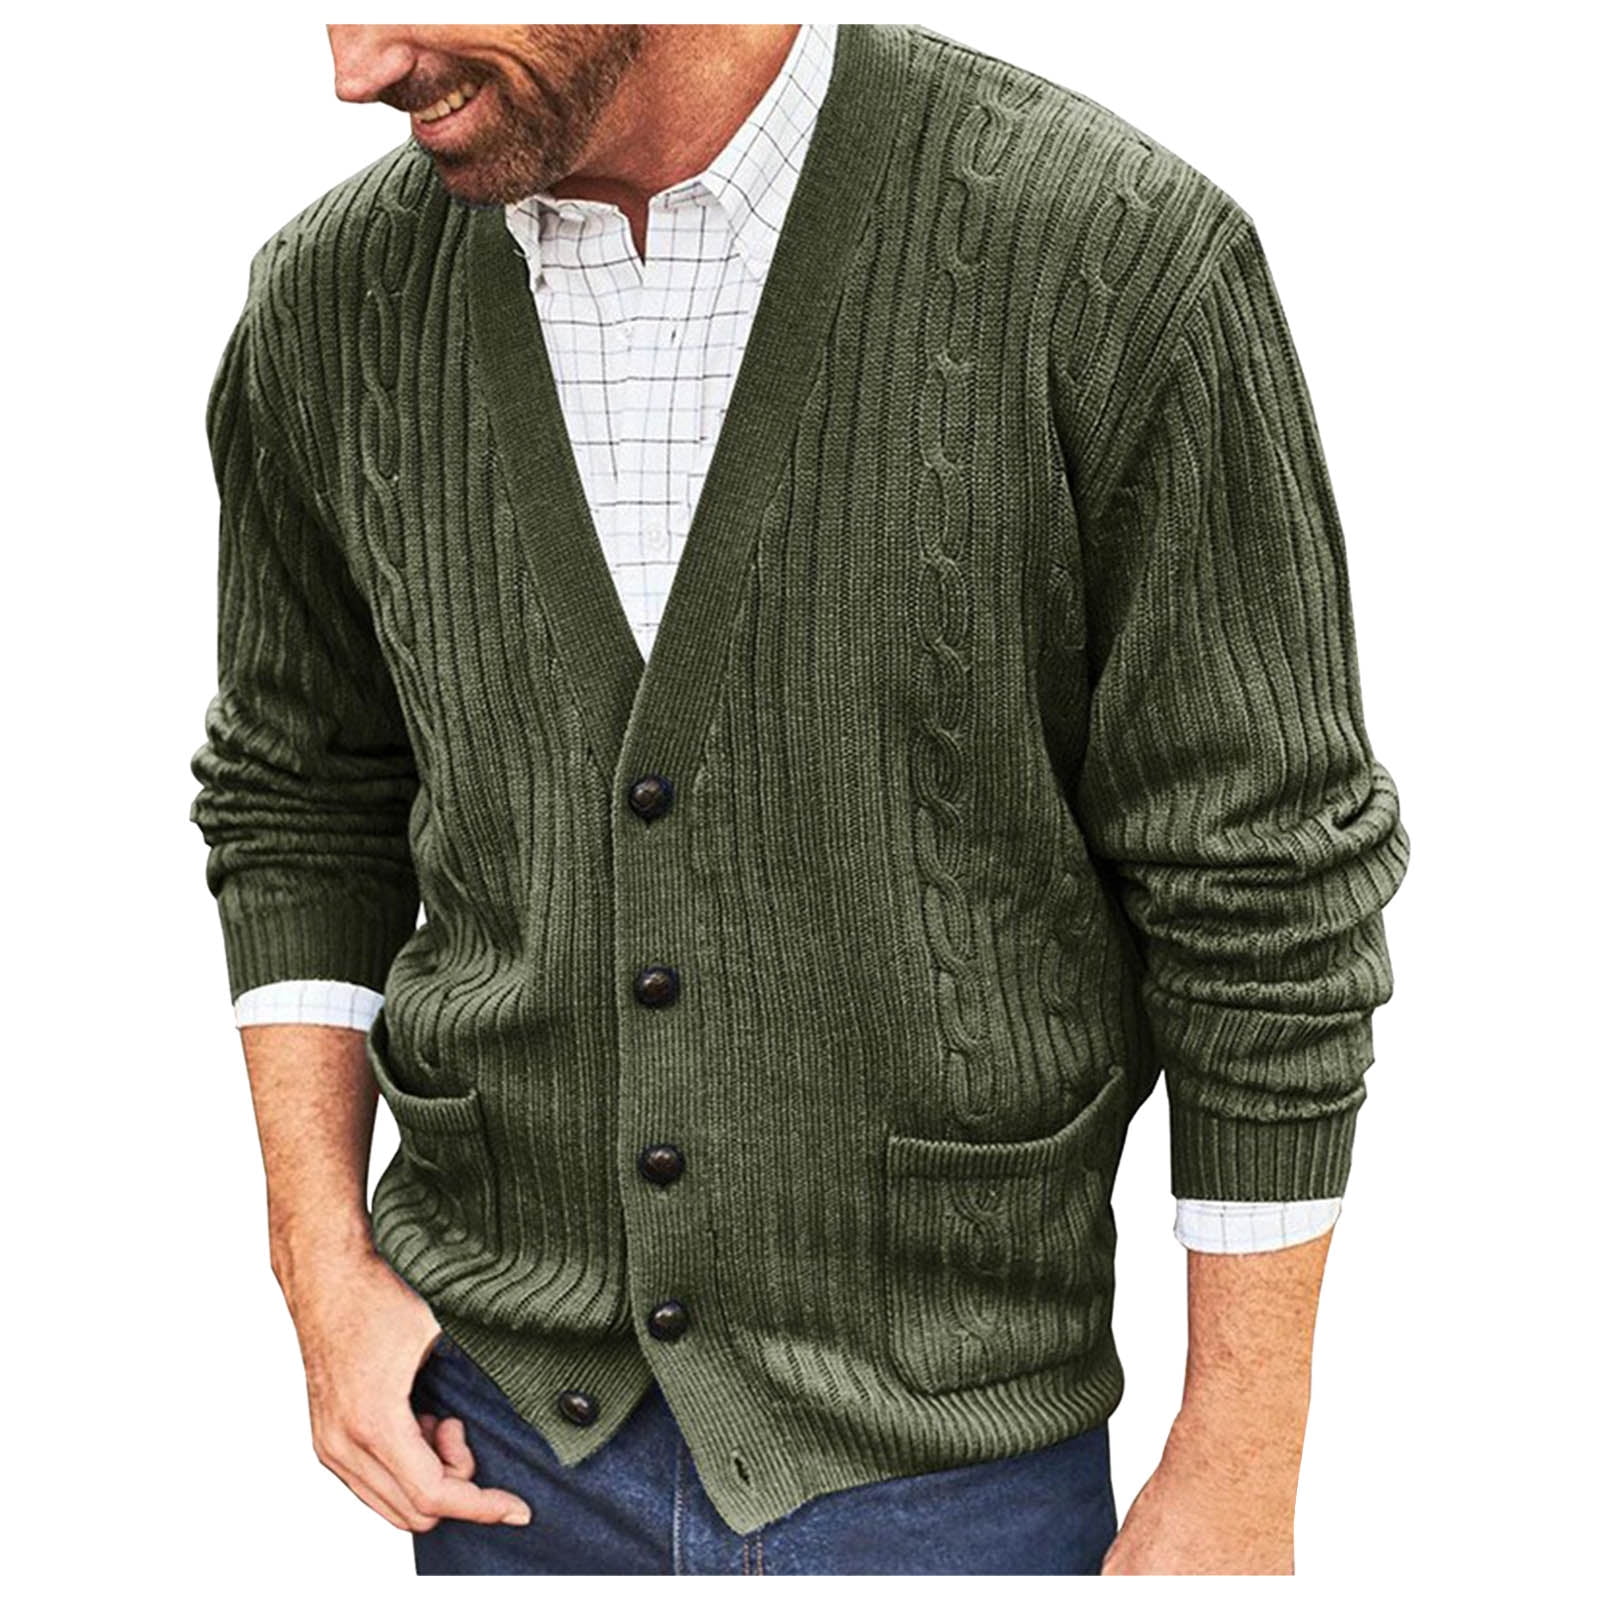 ketyyh-chn99 Cardigan For Men Mens Knit Cardigan Sweater Stand Color ...